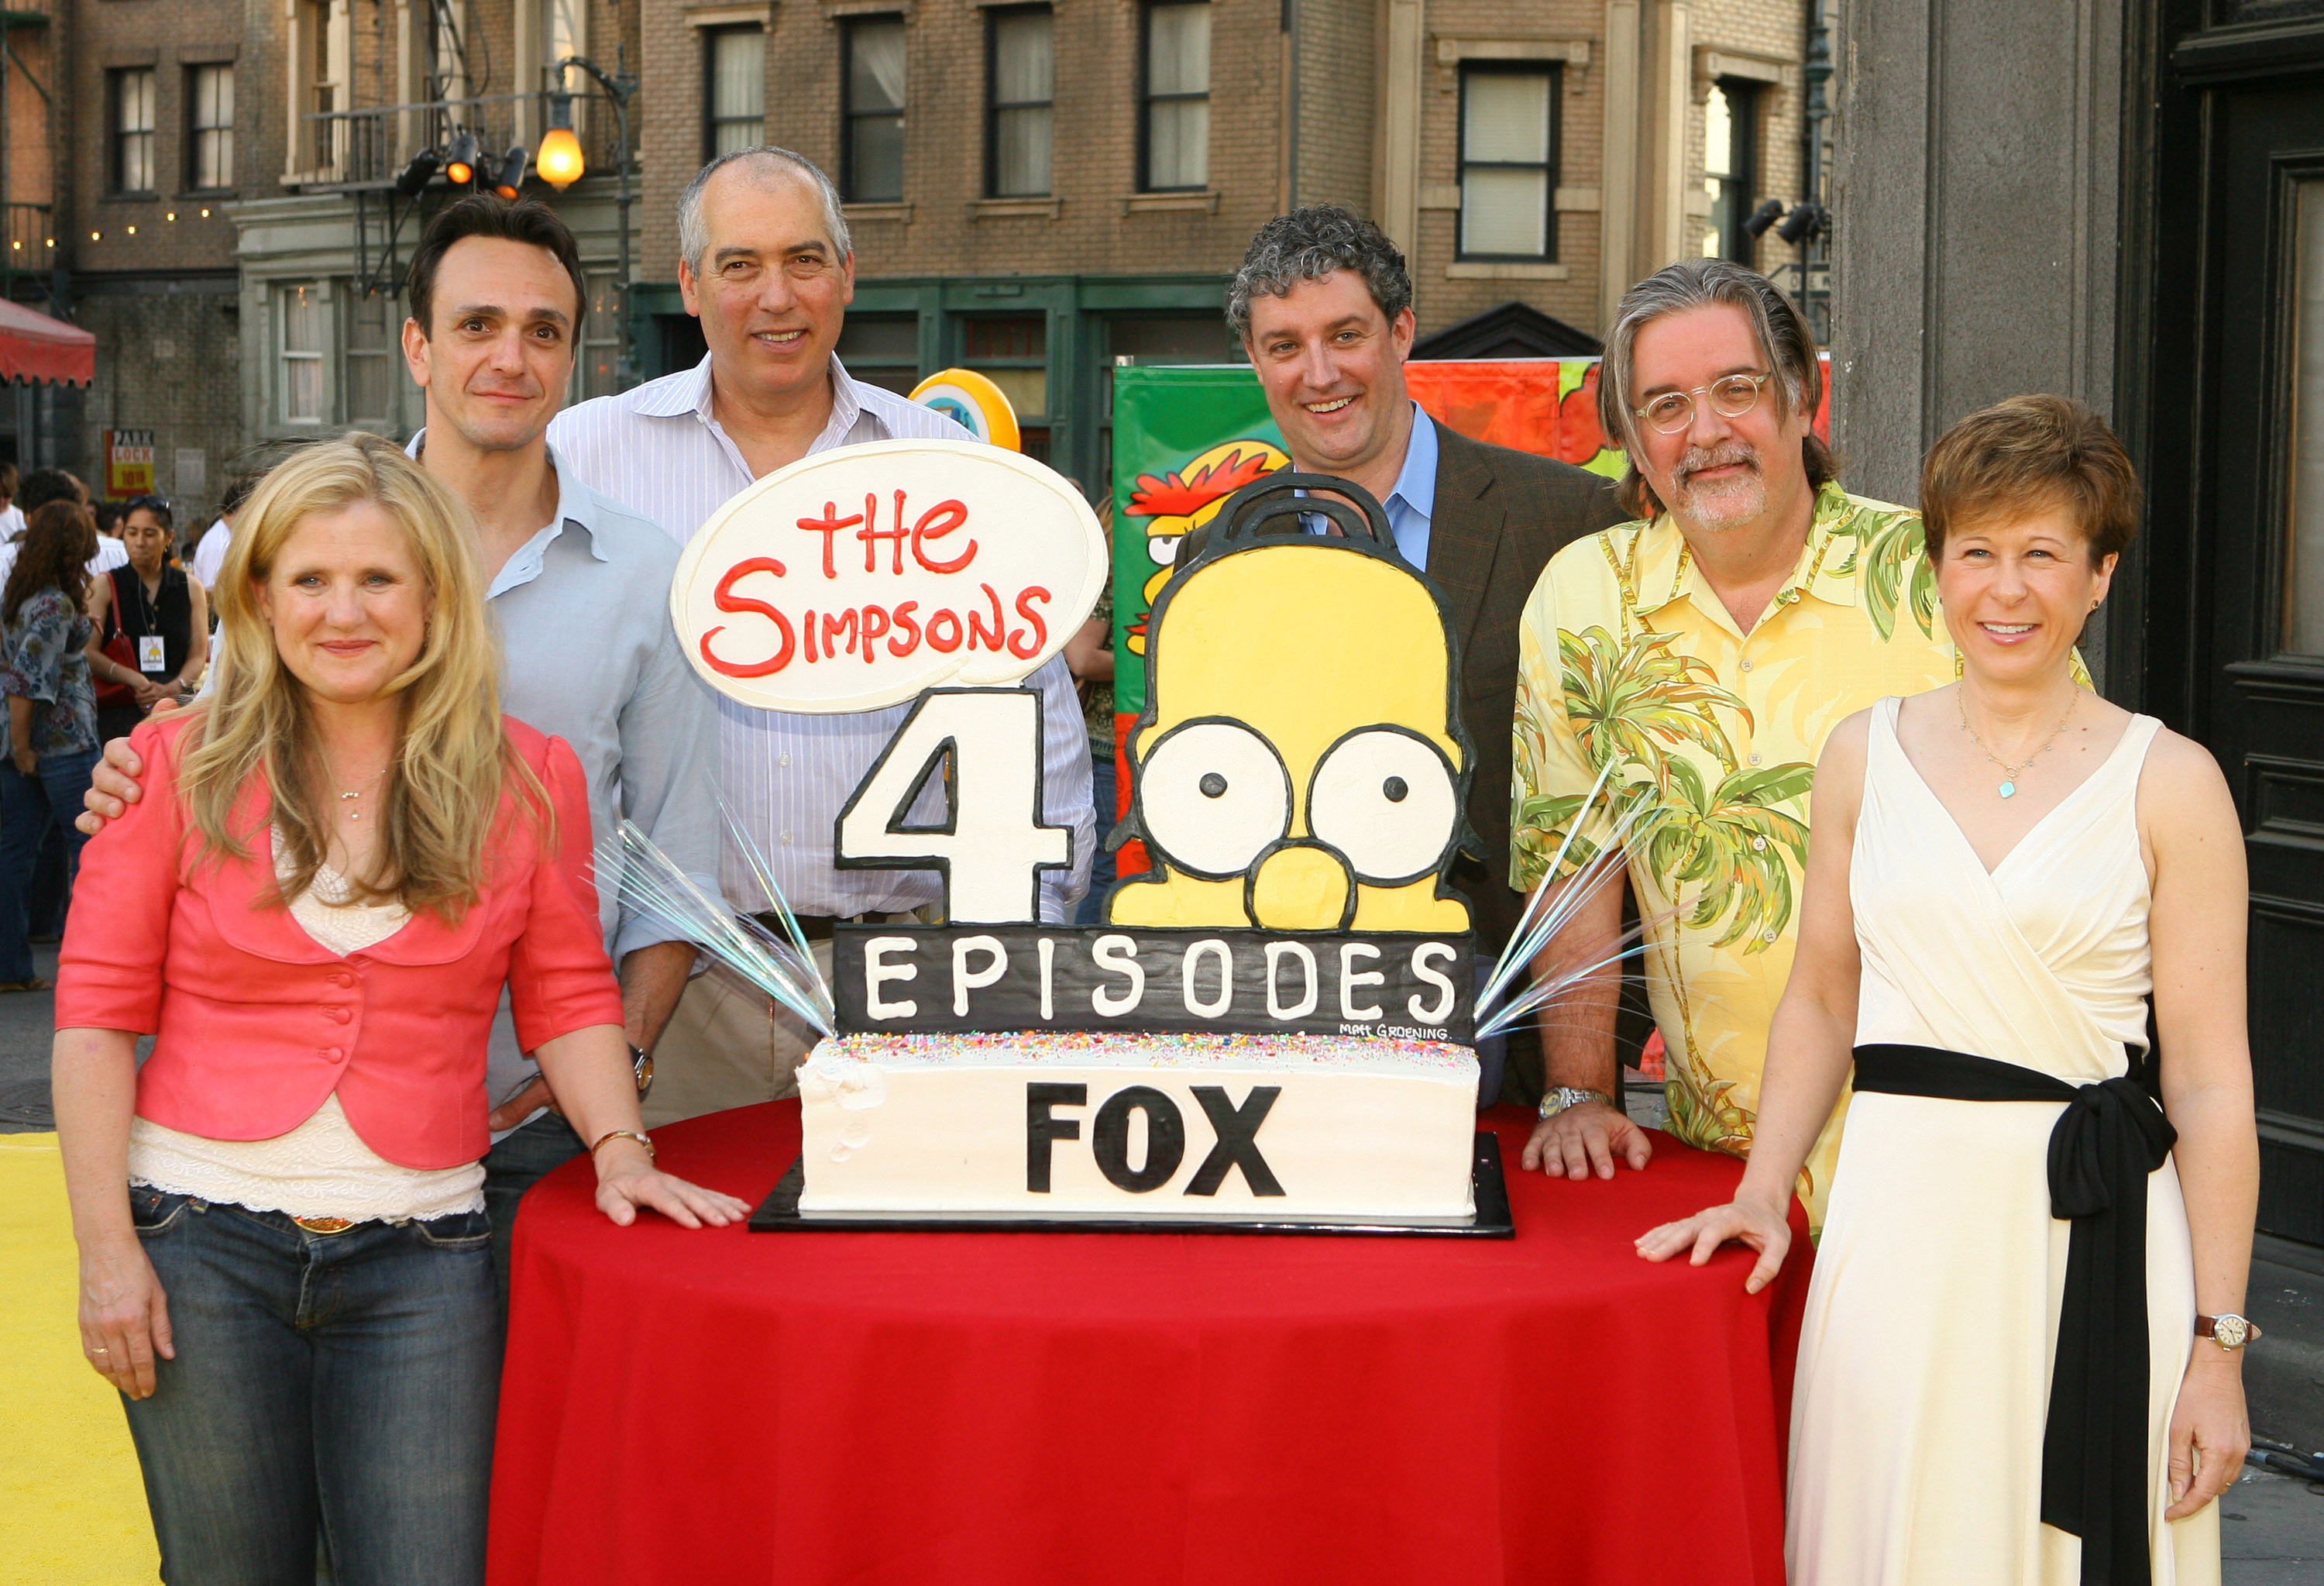 'The Simpsons' creator Matt Groening and the cast celebrate the show's 400th episode.